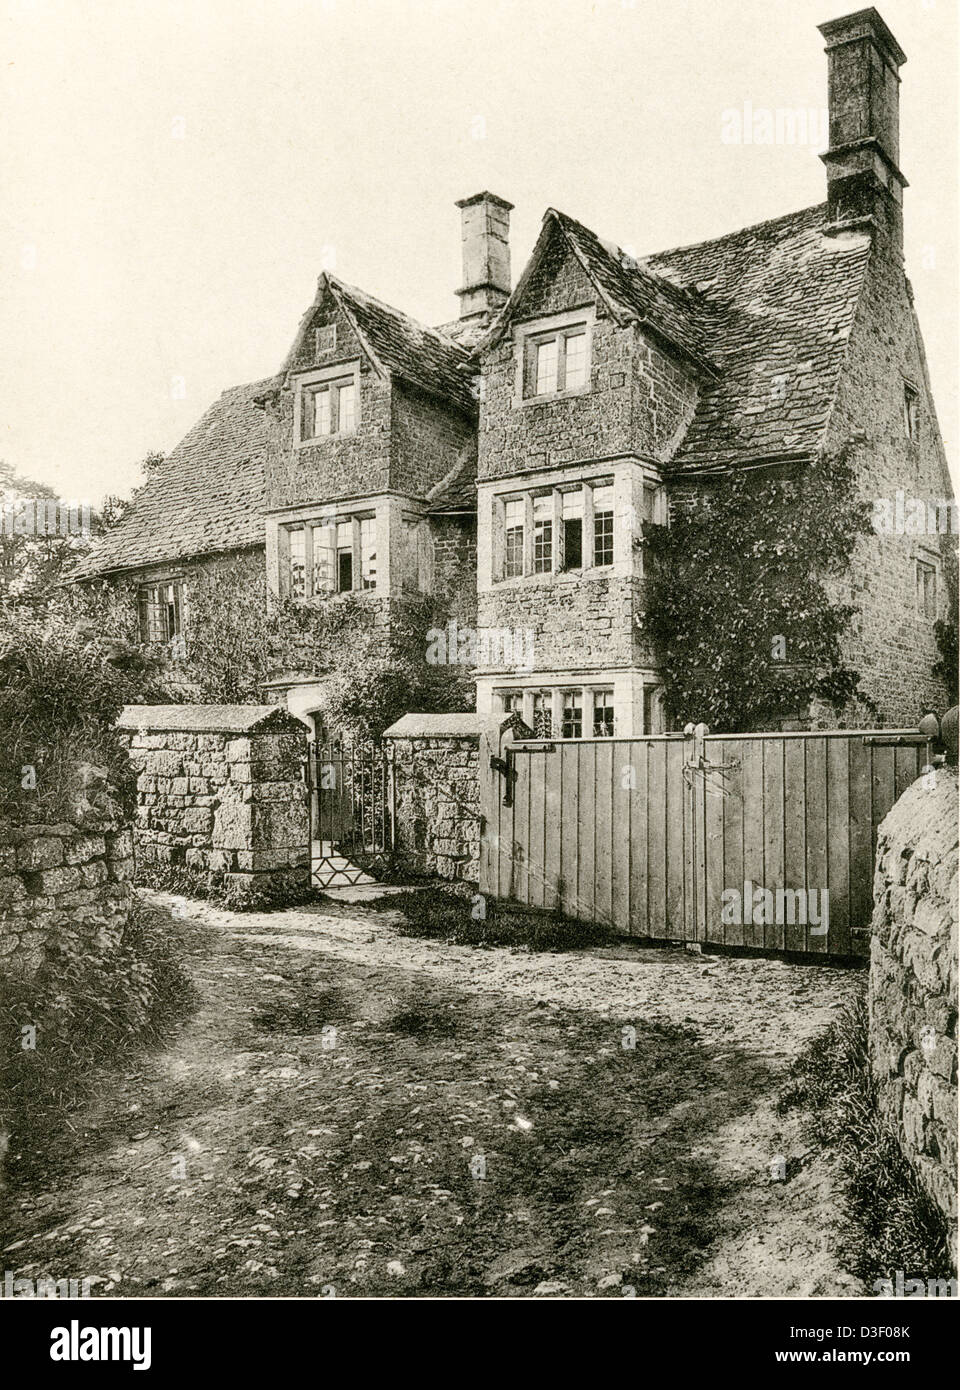 A collotype plate entitled ' A Farmhouse at Barford, Oxon.' scanned at high resolution from a book published in 1905. Stock Photo